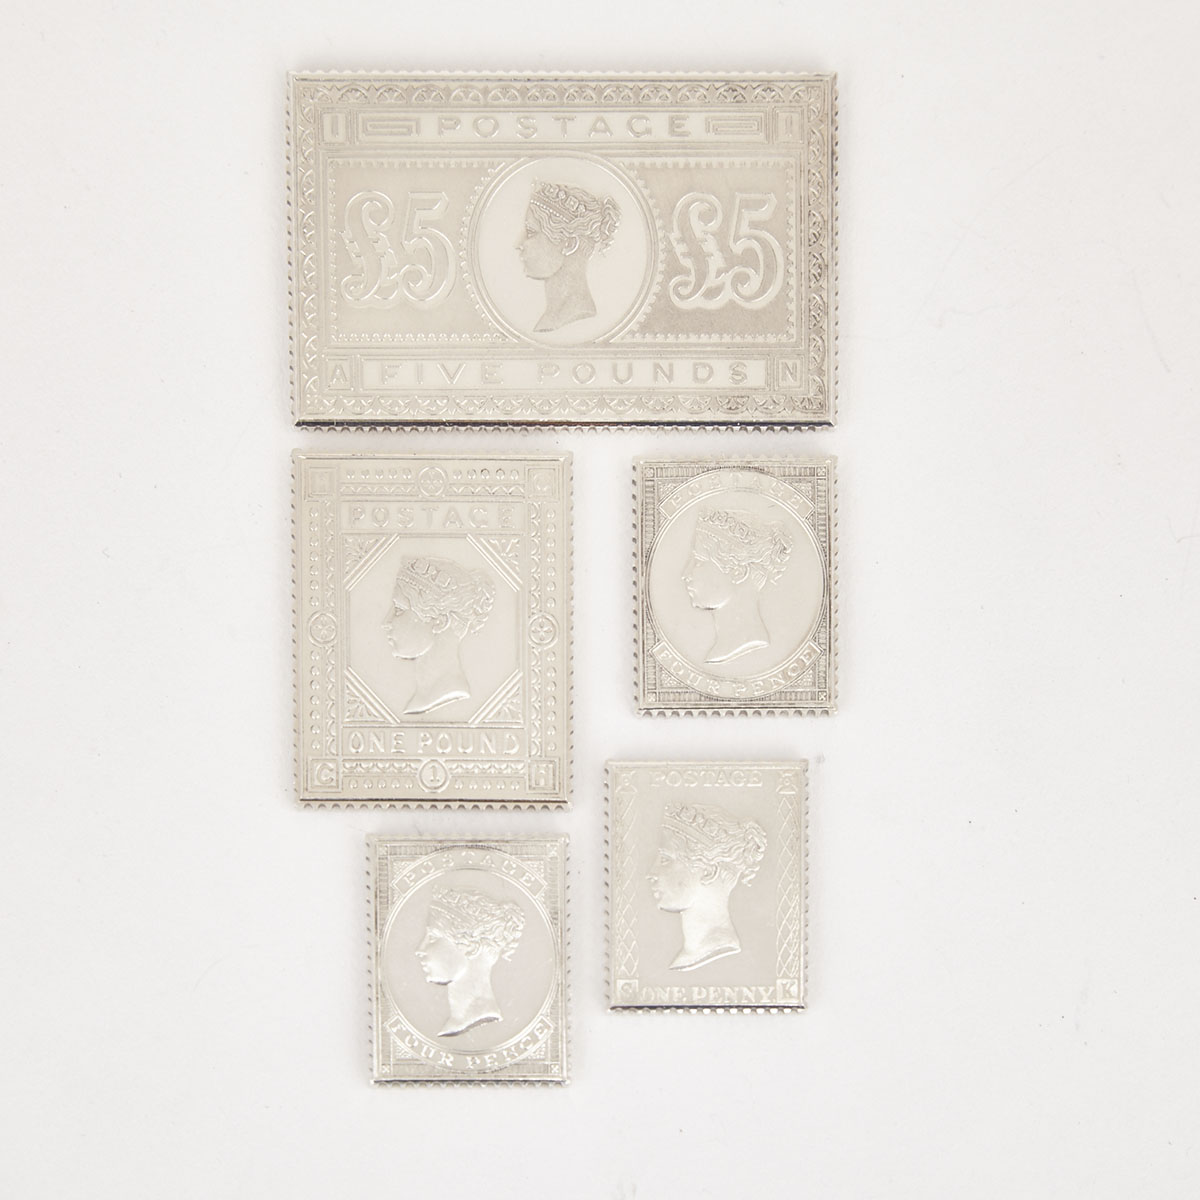 Five English Silver Replicas of Postage Stamps, London, 1977